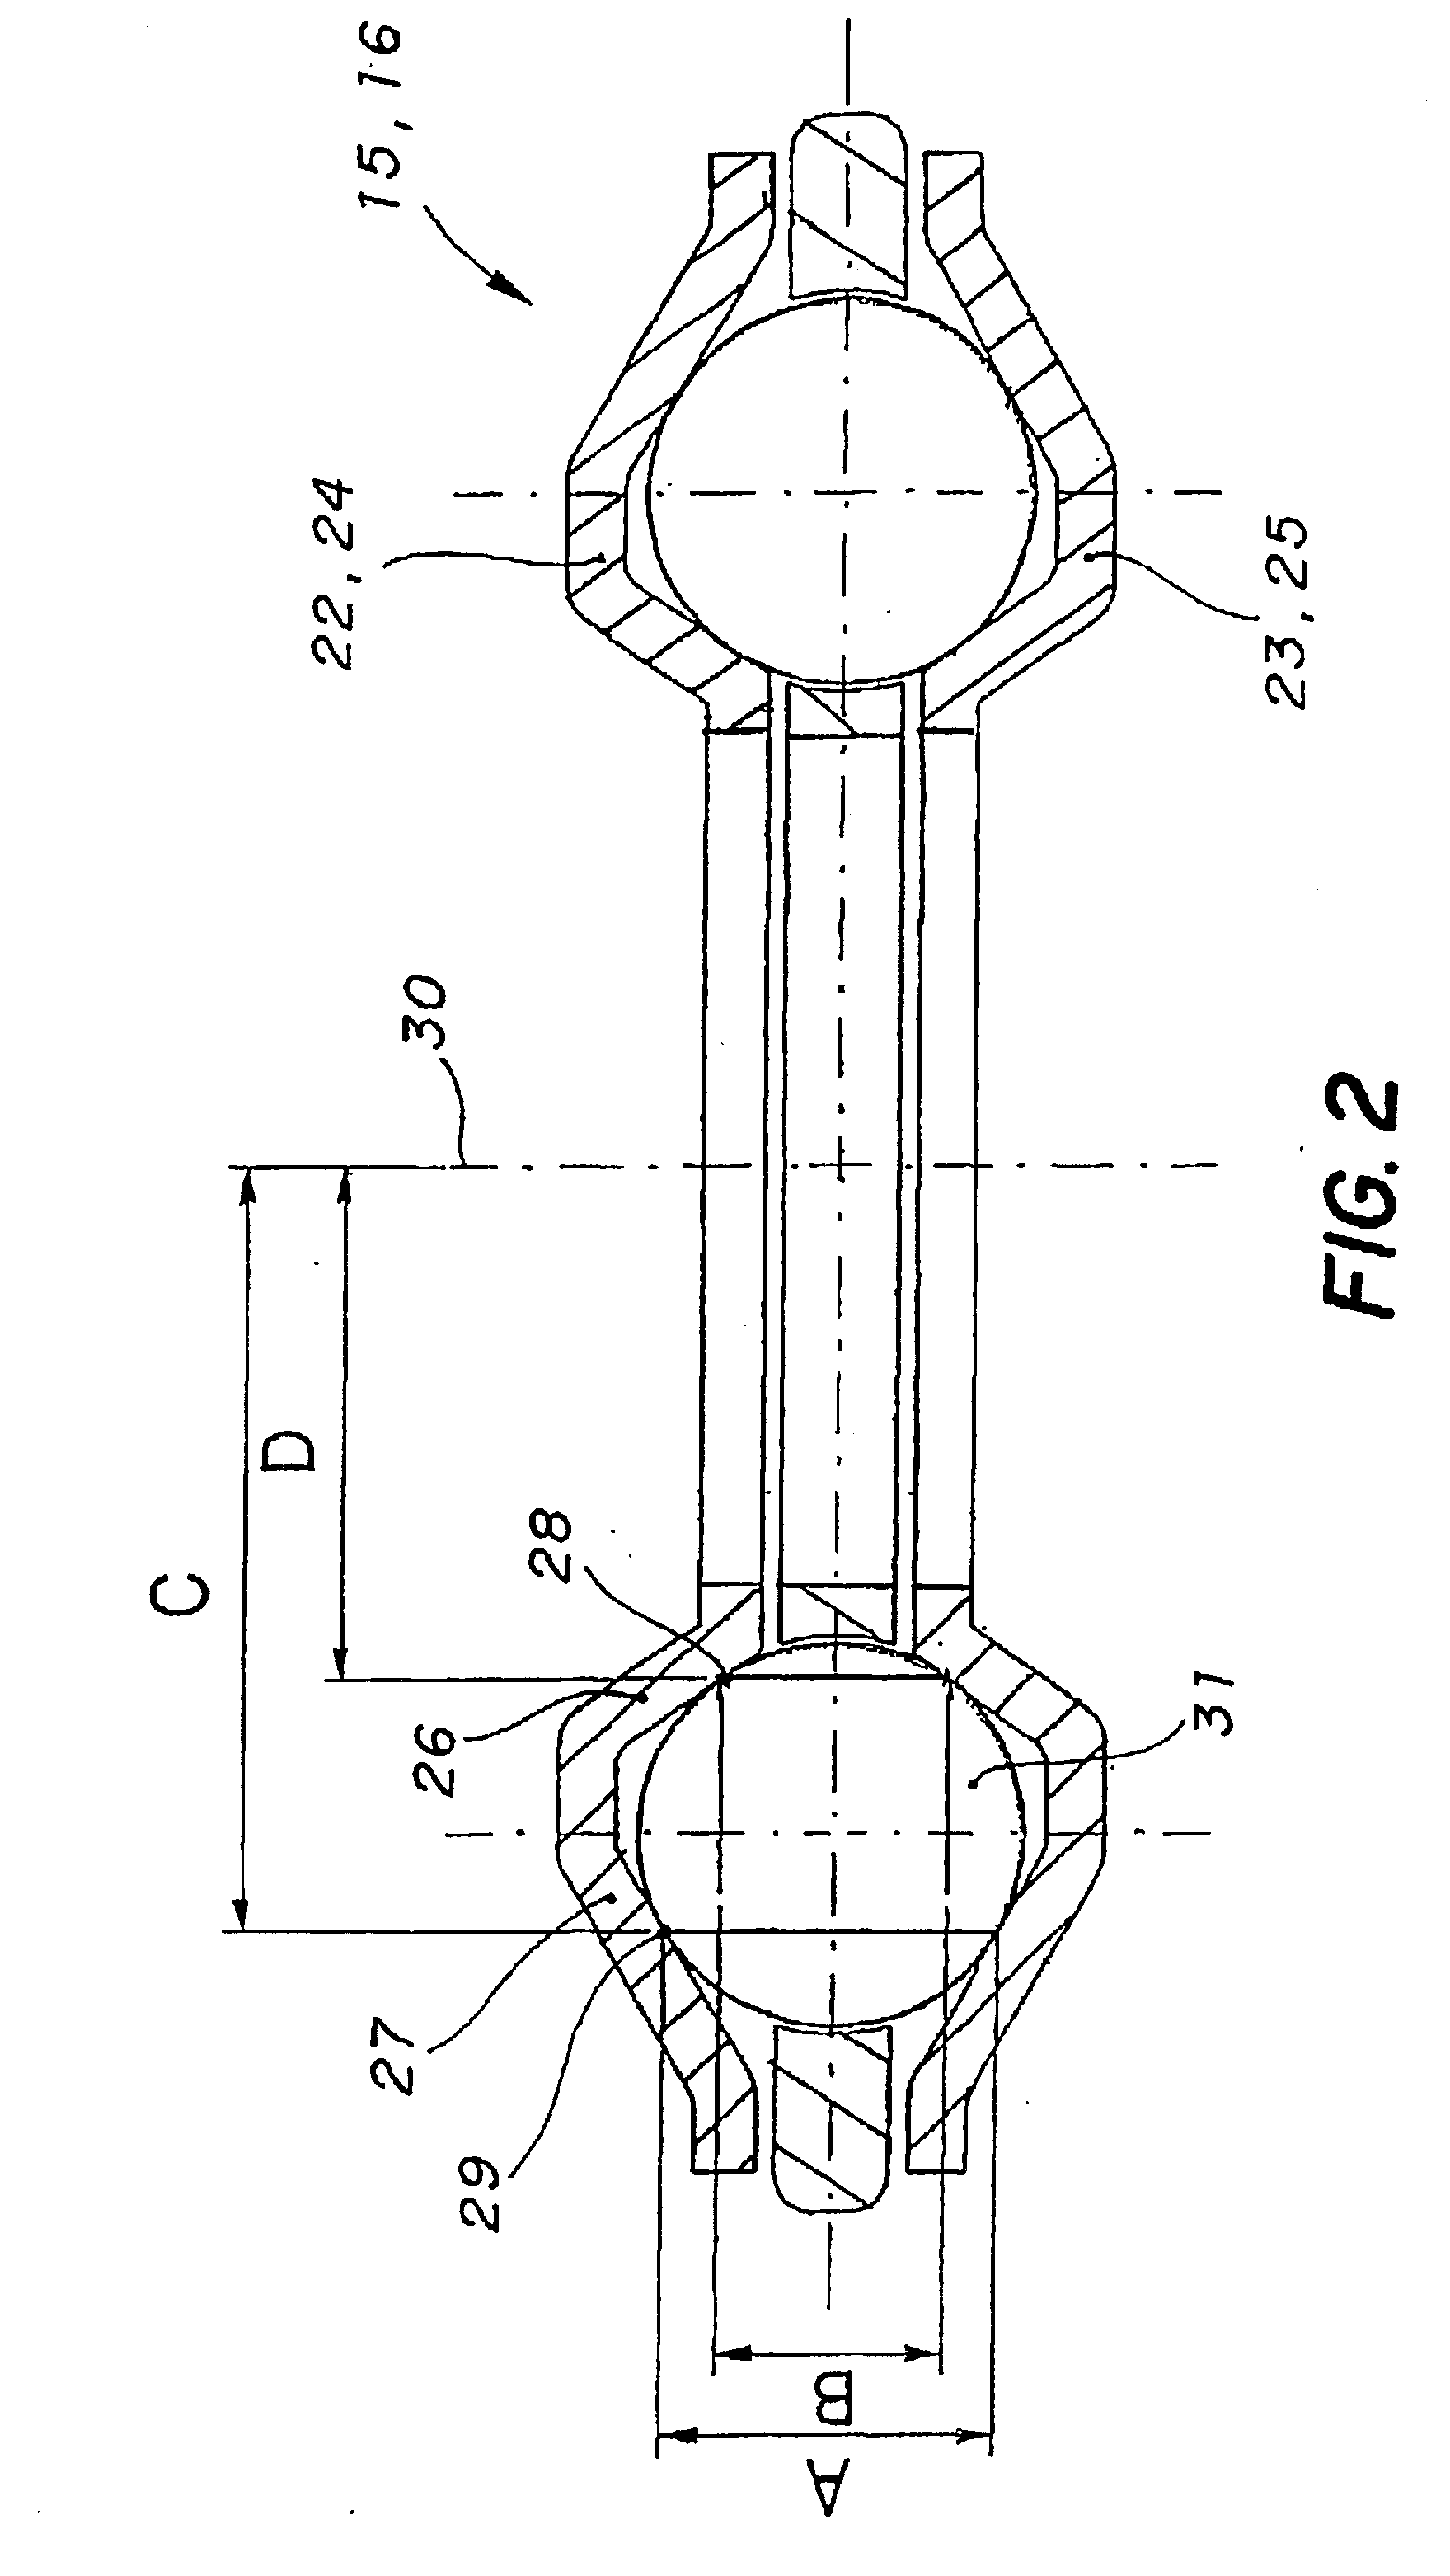 Linear or rotary actuator